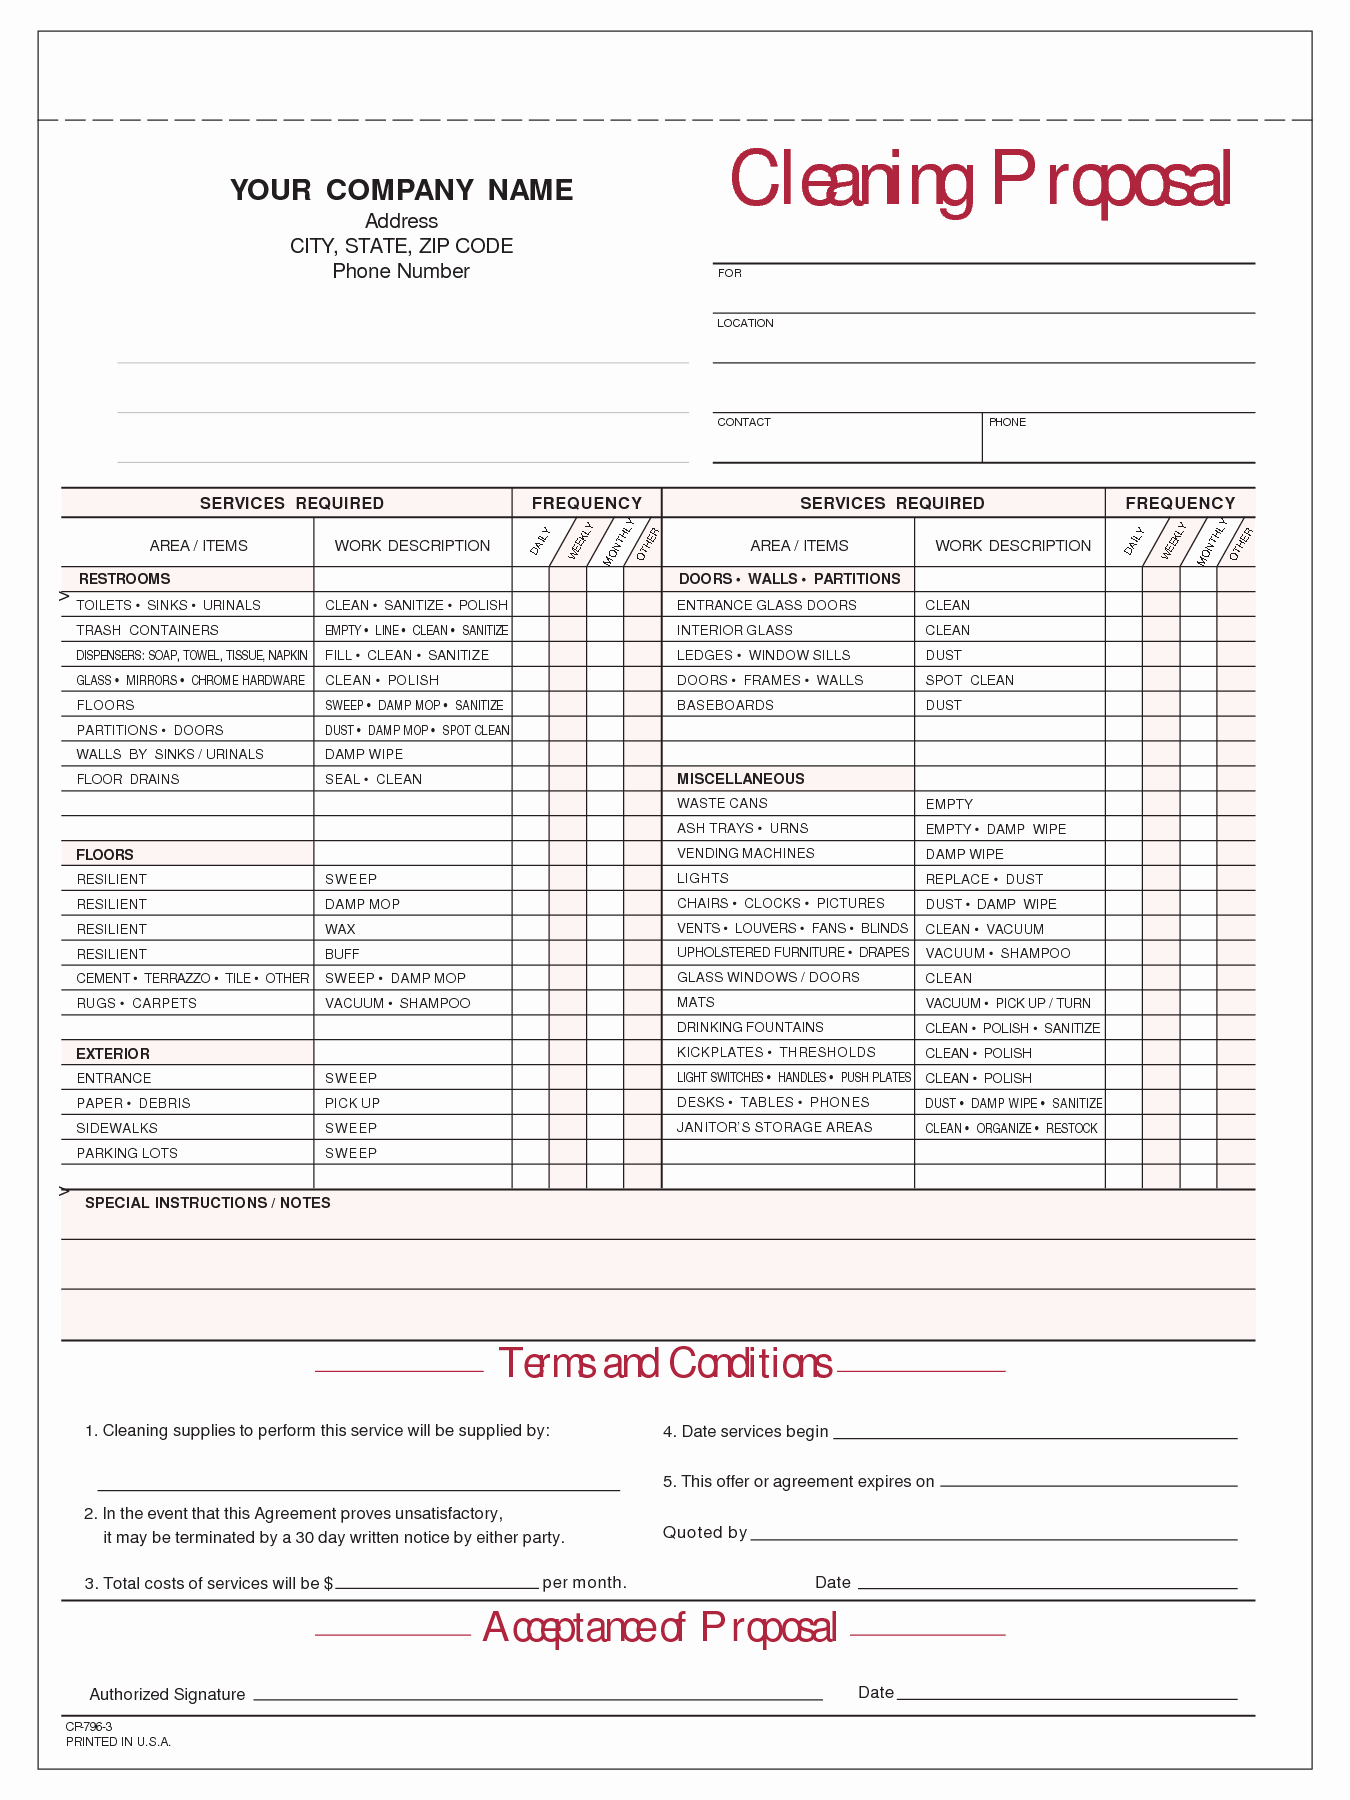 Church Cleaning Checklist Template Lovely Janitorial Cleaning Proposal Templates